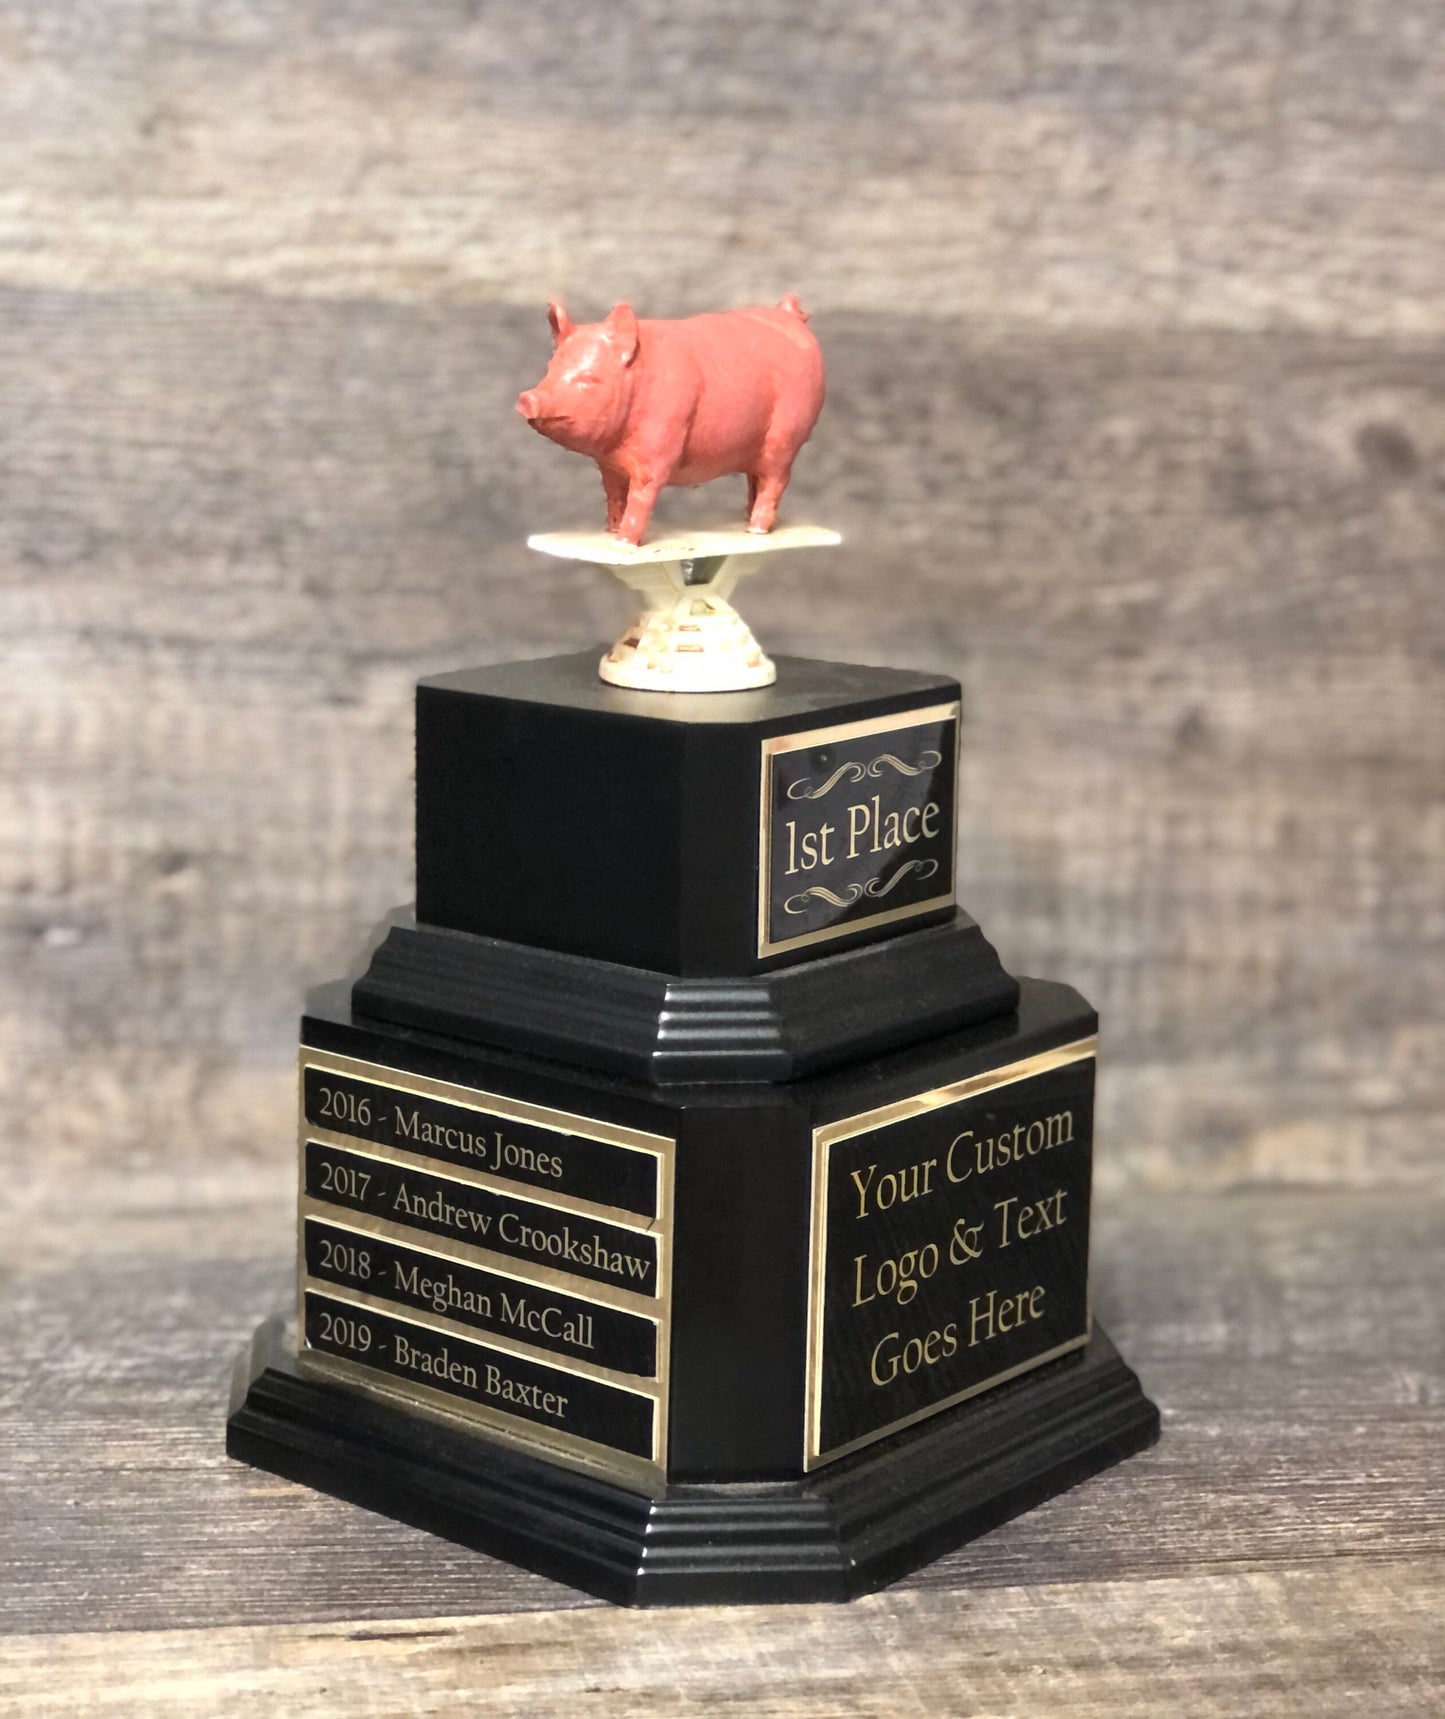 BBQ Trophy Perpetual Competition Cook Off Champion Trophy Best BBQ Trophy Pig Trophy Best Ribs Best Chicken Best Beef Trophy Award Winner